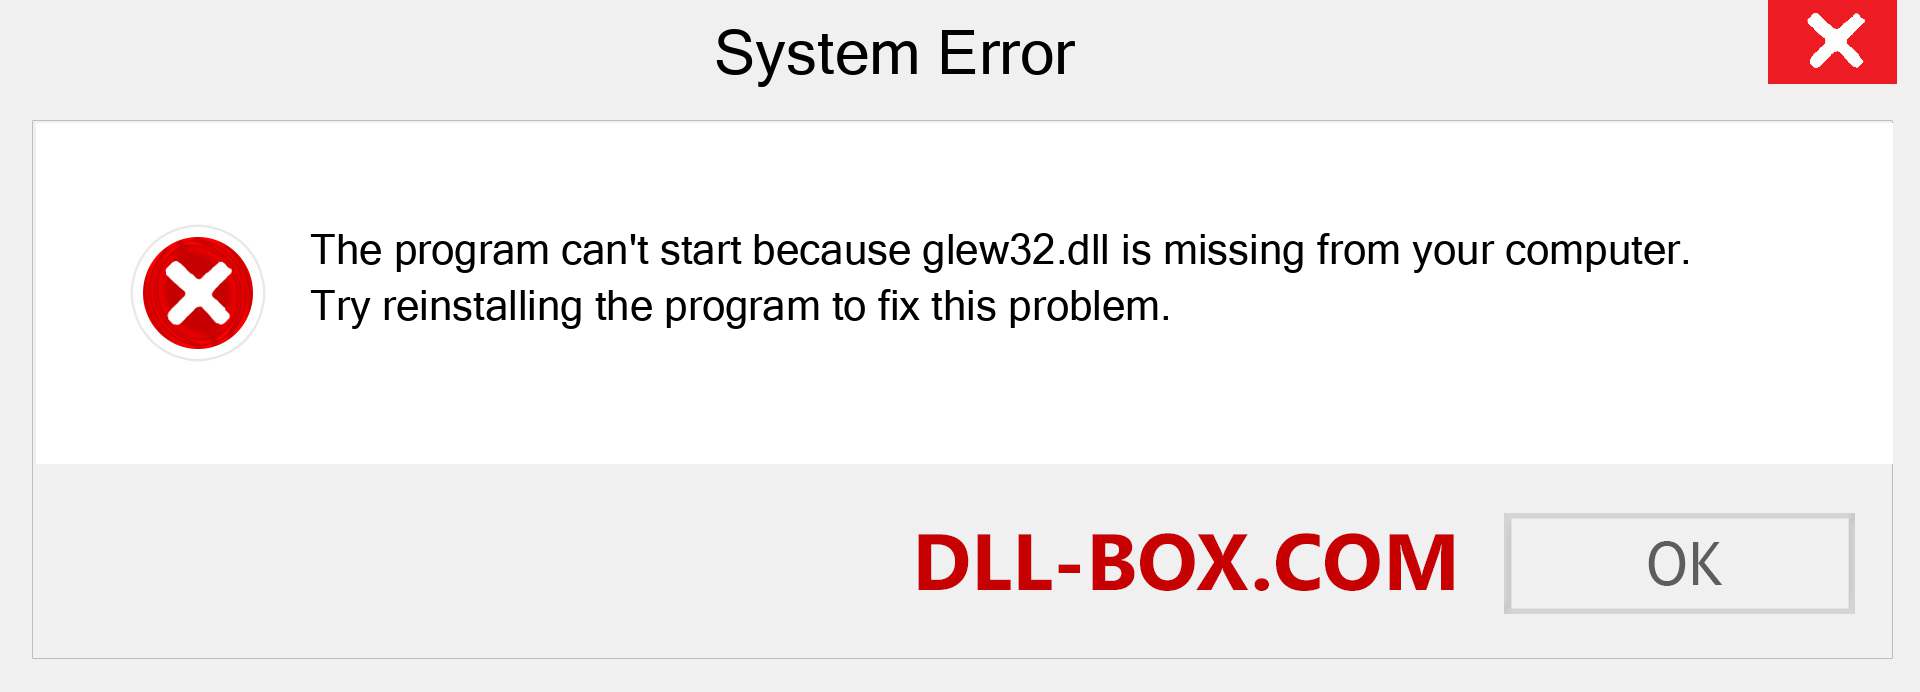  glew32.dll file is missing?. Download for Windows 7, 8, 10 - Fix  glew32 dll Missing Error on Windows, photos, images